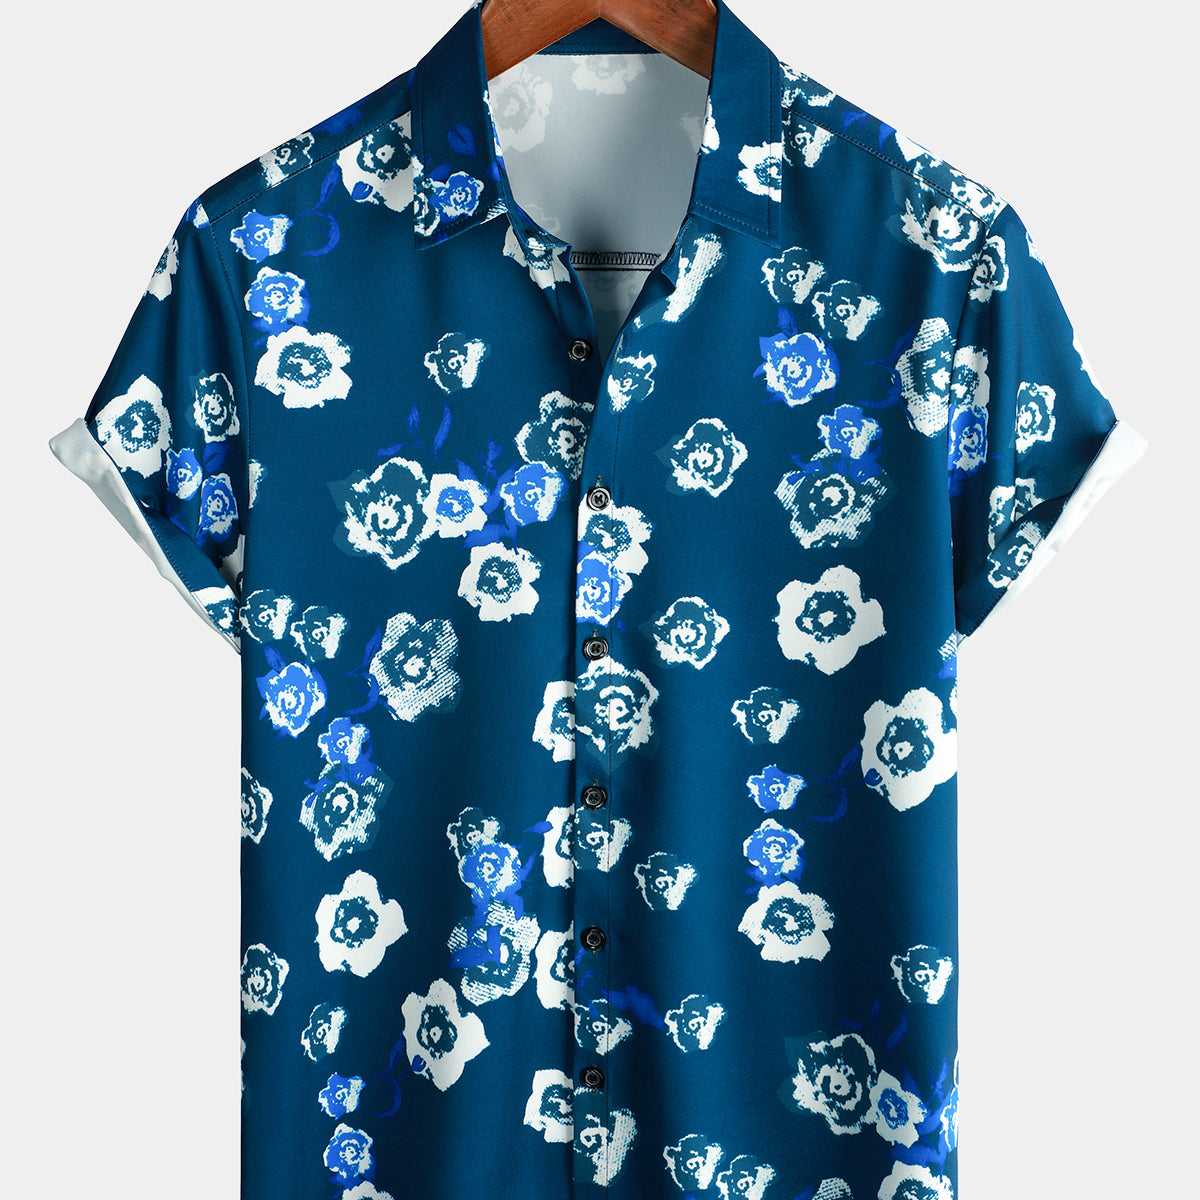 Men's Holiday Summer Casual Floral Button Up Navy Blue Short Sleeve Shirt